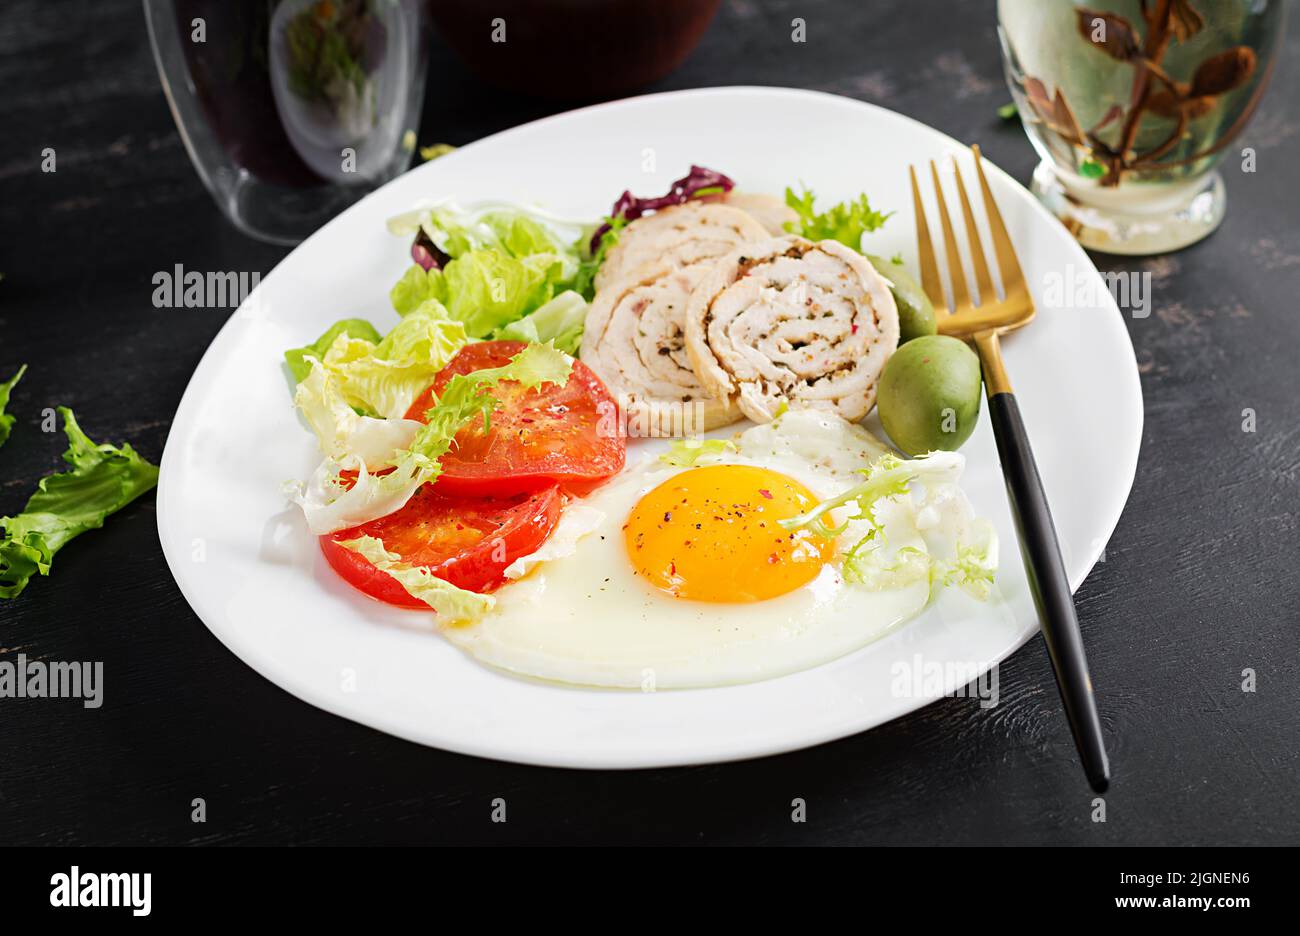 Fried egg, meat chicken roll, olives and tomatoes. Keto, paleo breakfast. Ketogenic food. Stock Photo